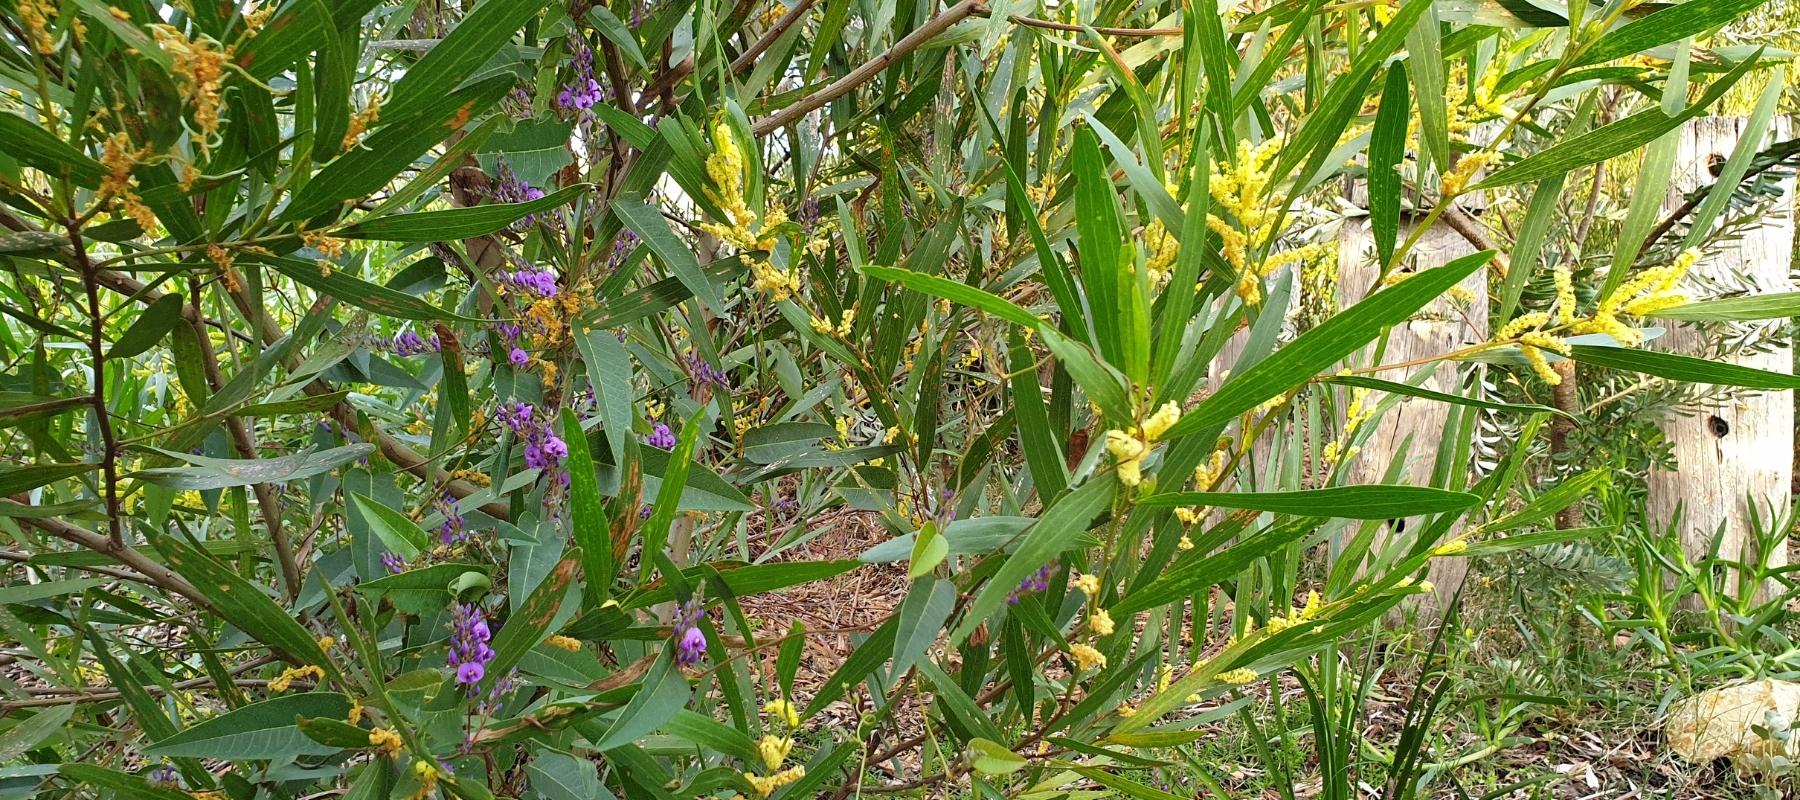 Hardenbergia and acacia combo in the garden